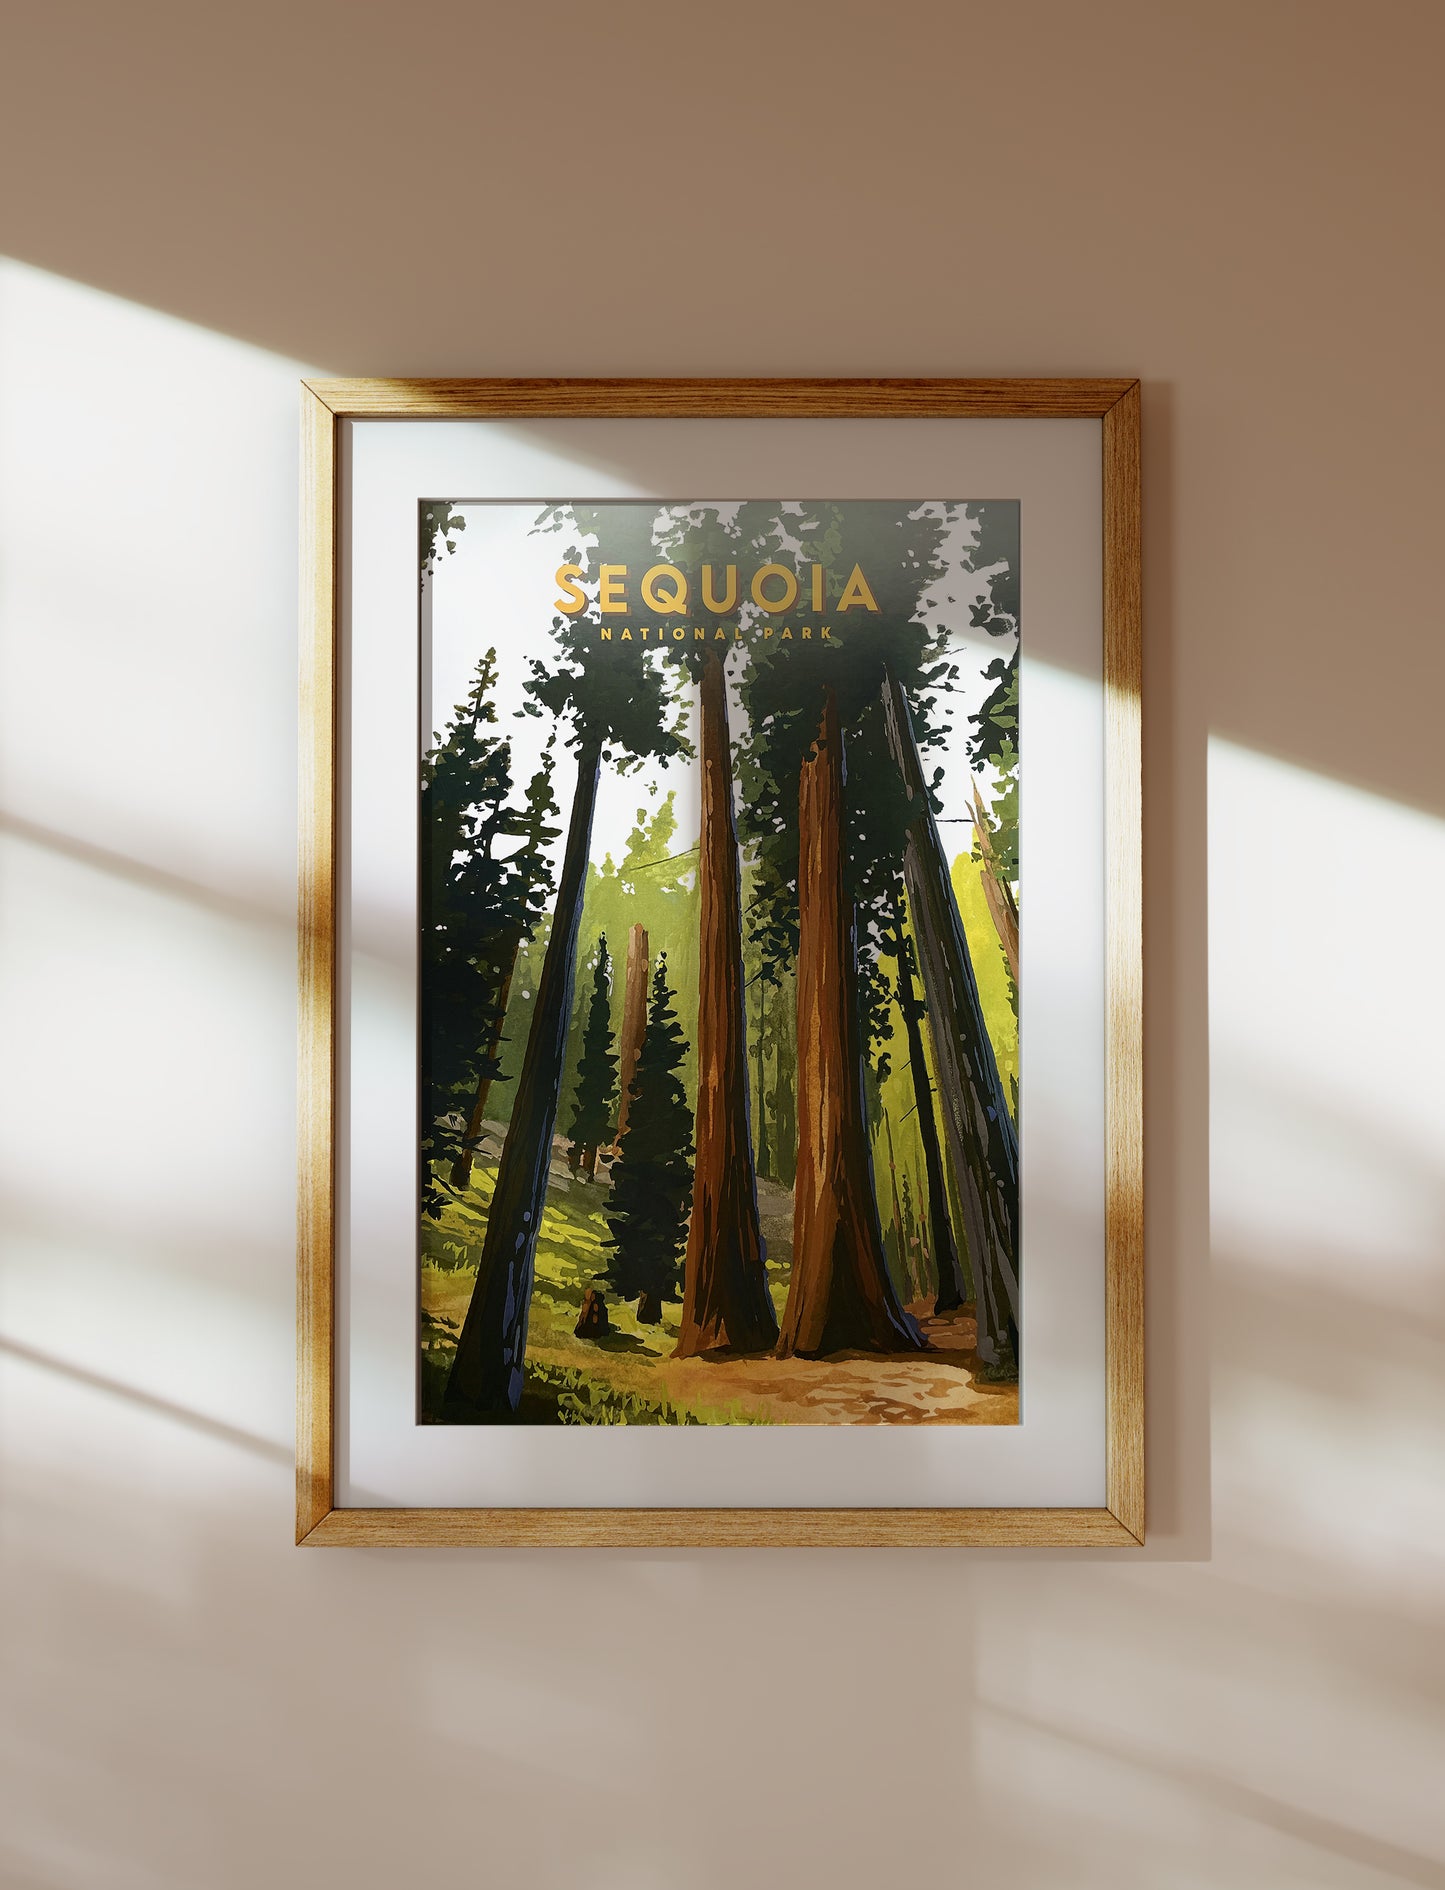 'Sequoia' National Park Travel Poster